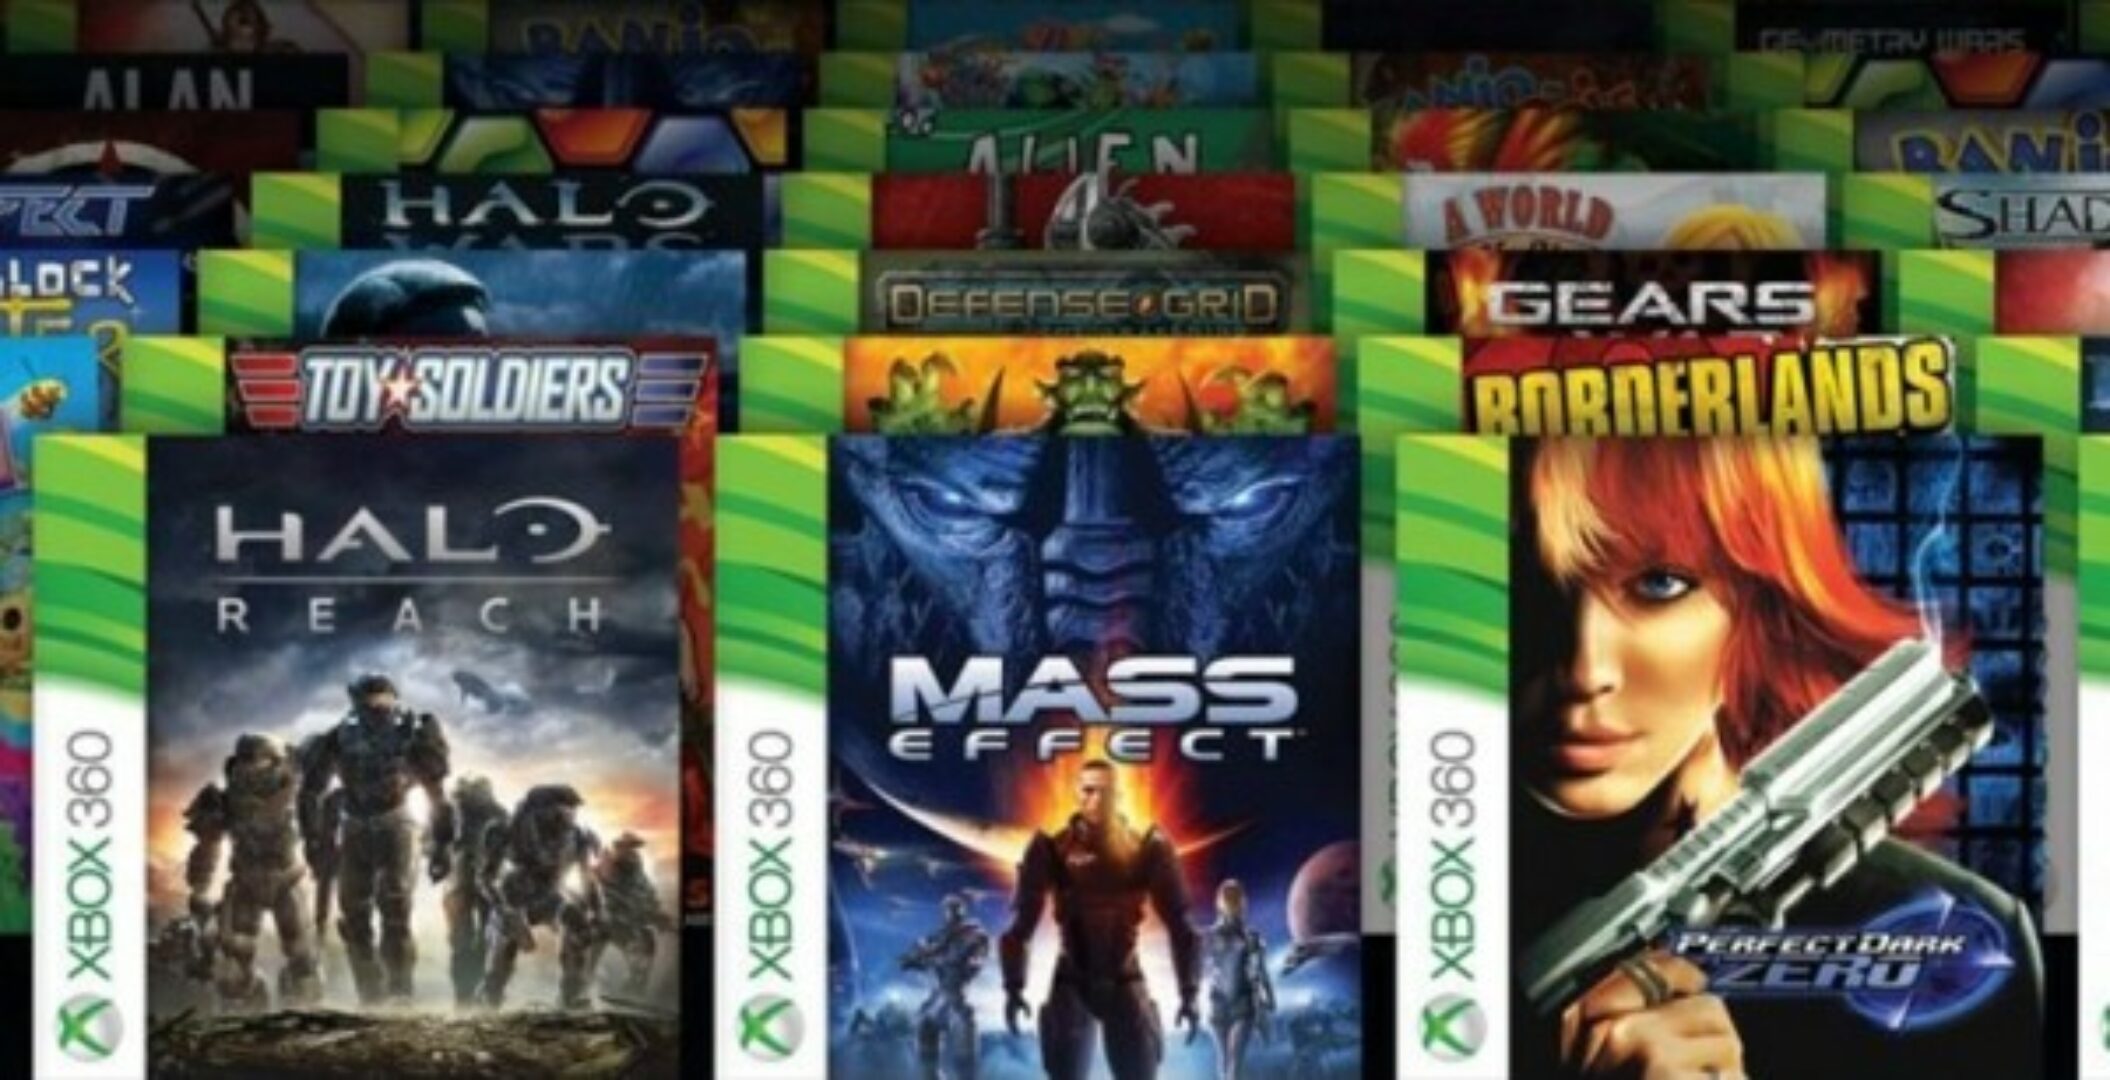 New Titles Announced For Xbox One Backwards Compatibility